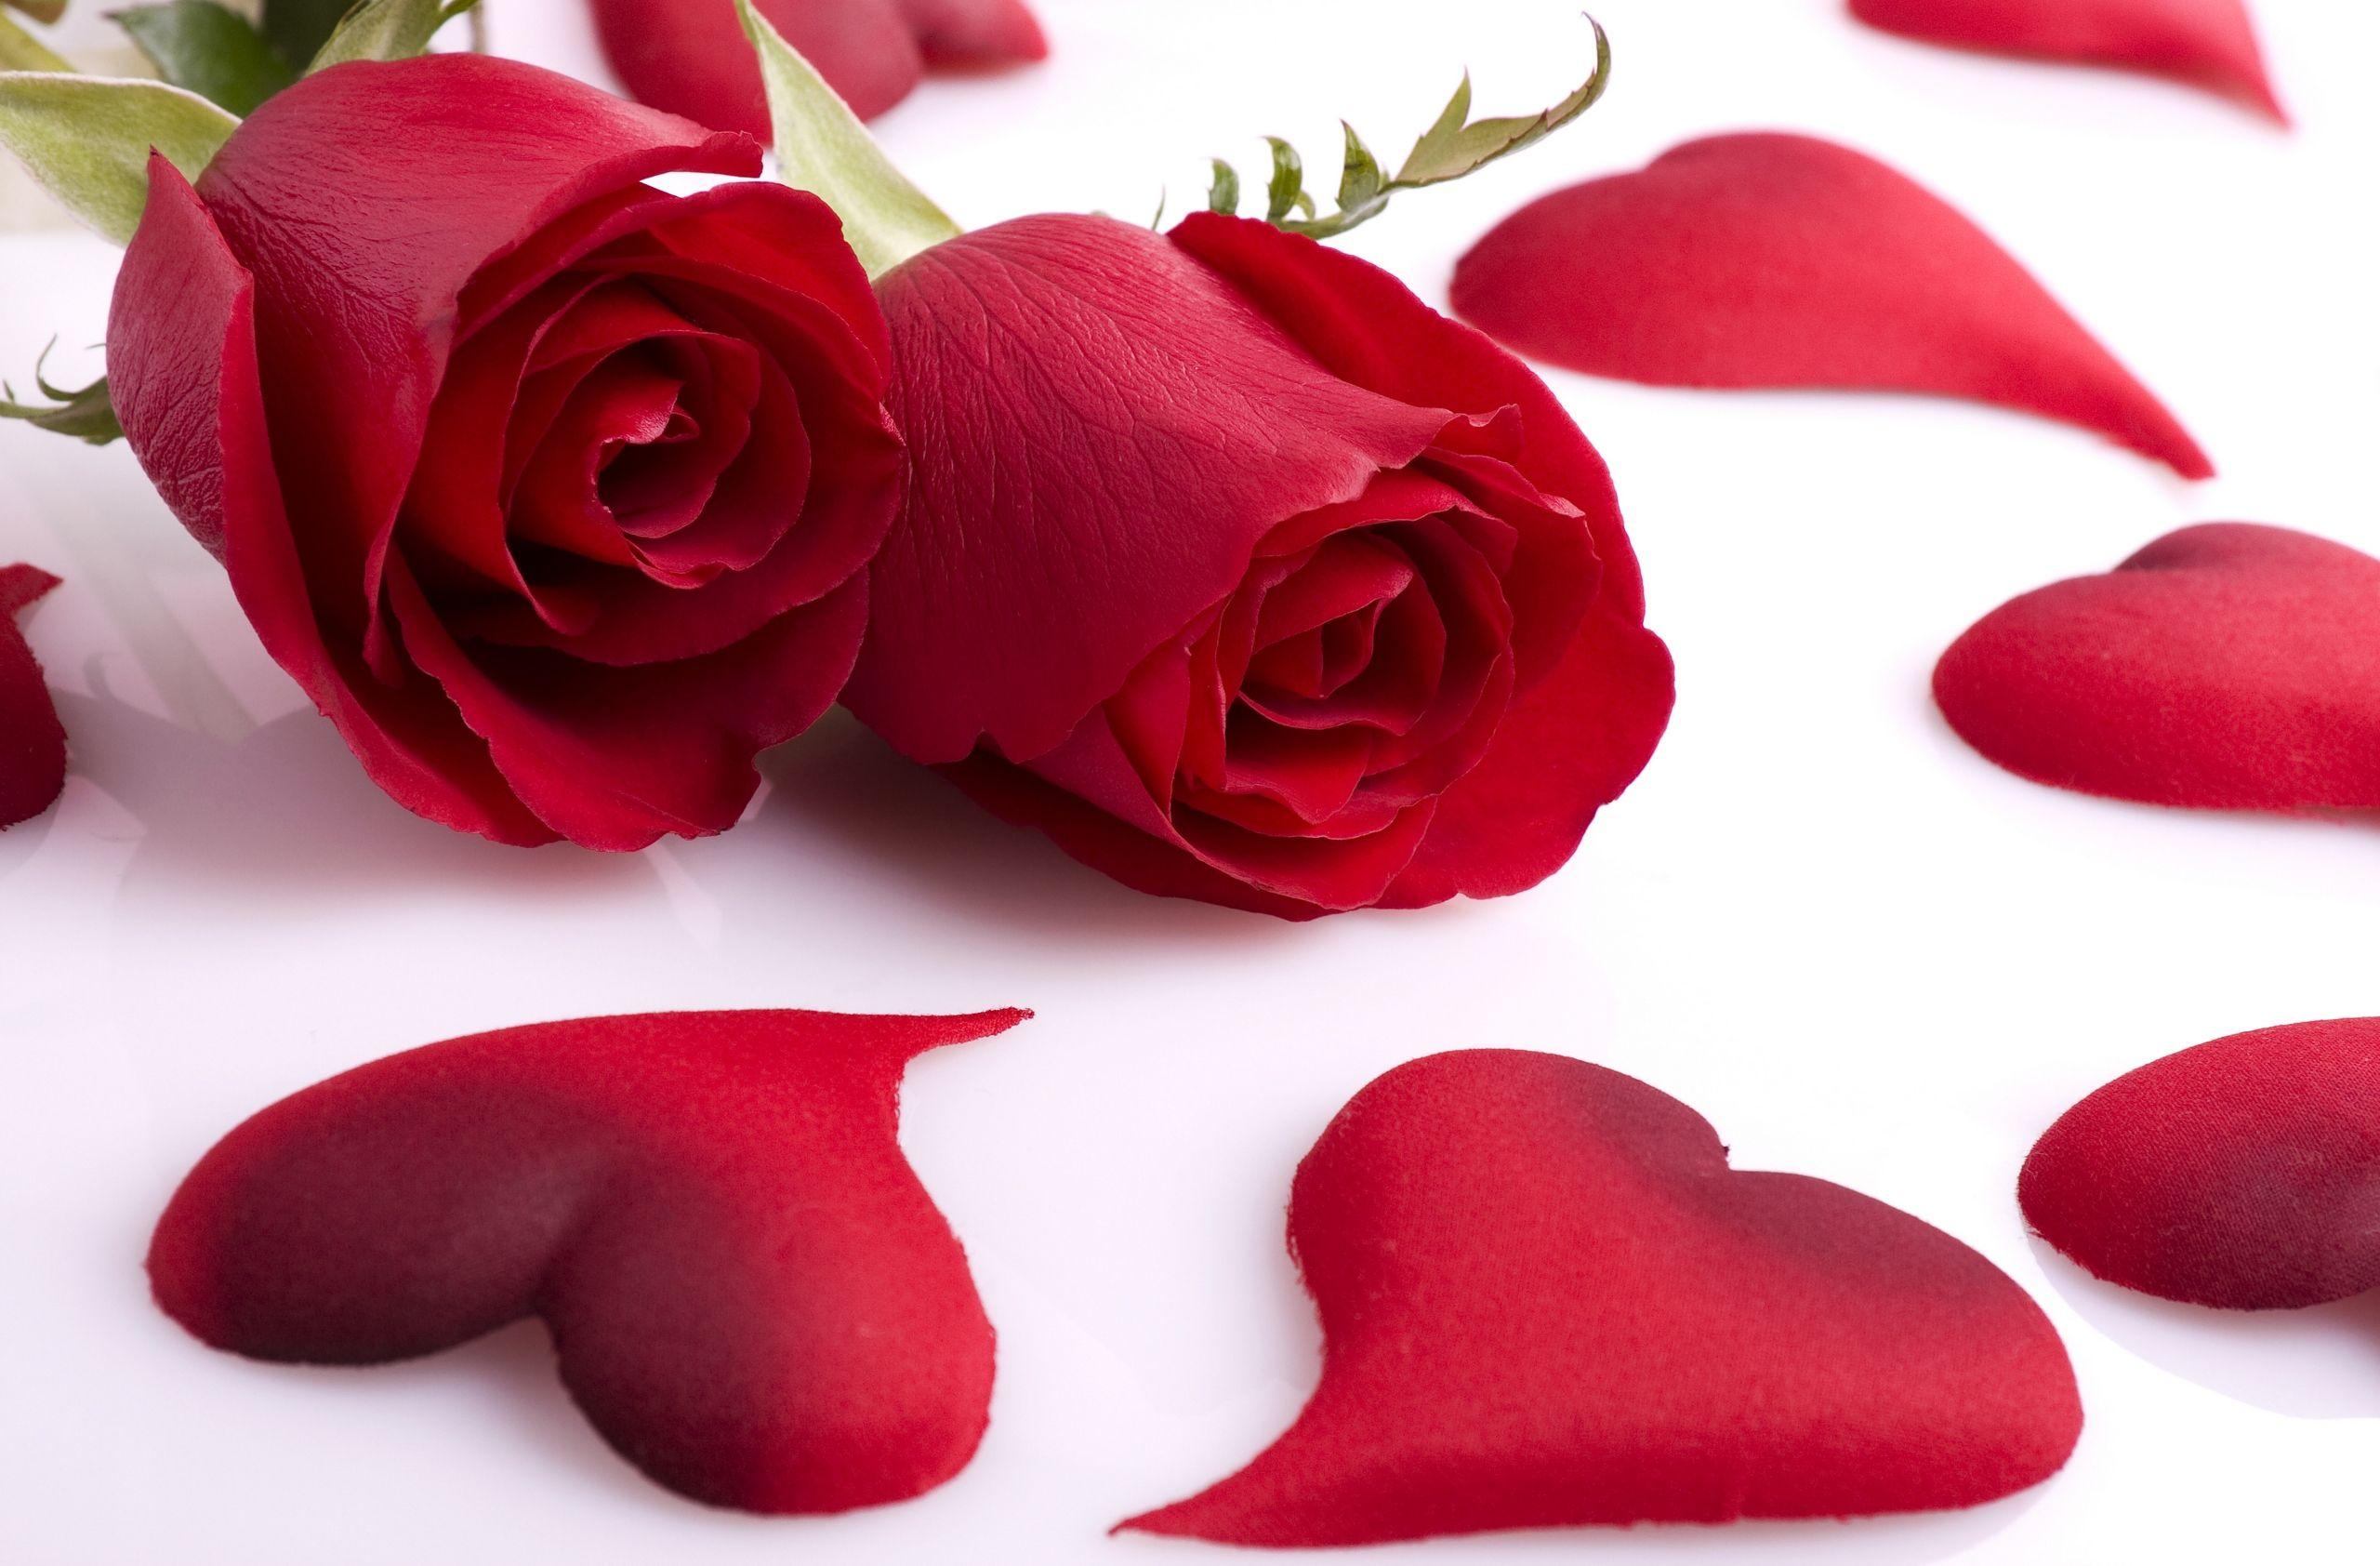 Awesome Beautiful Red Love Image High Resolution Wallpaper Image